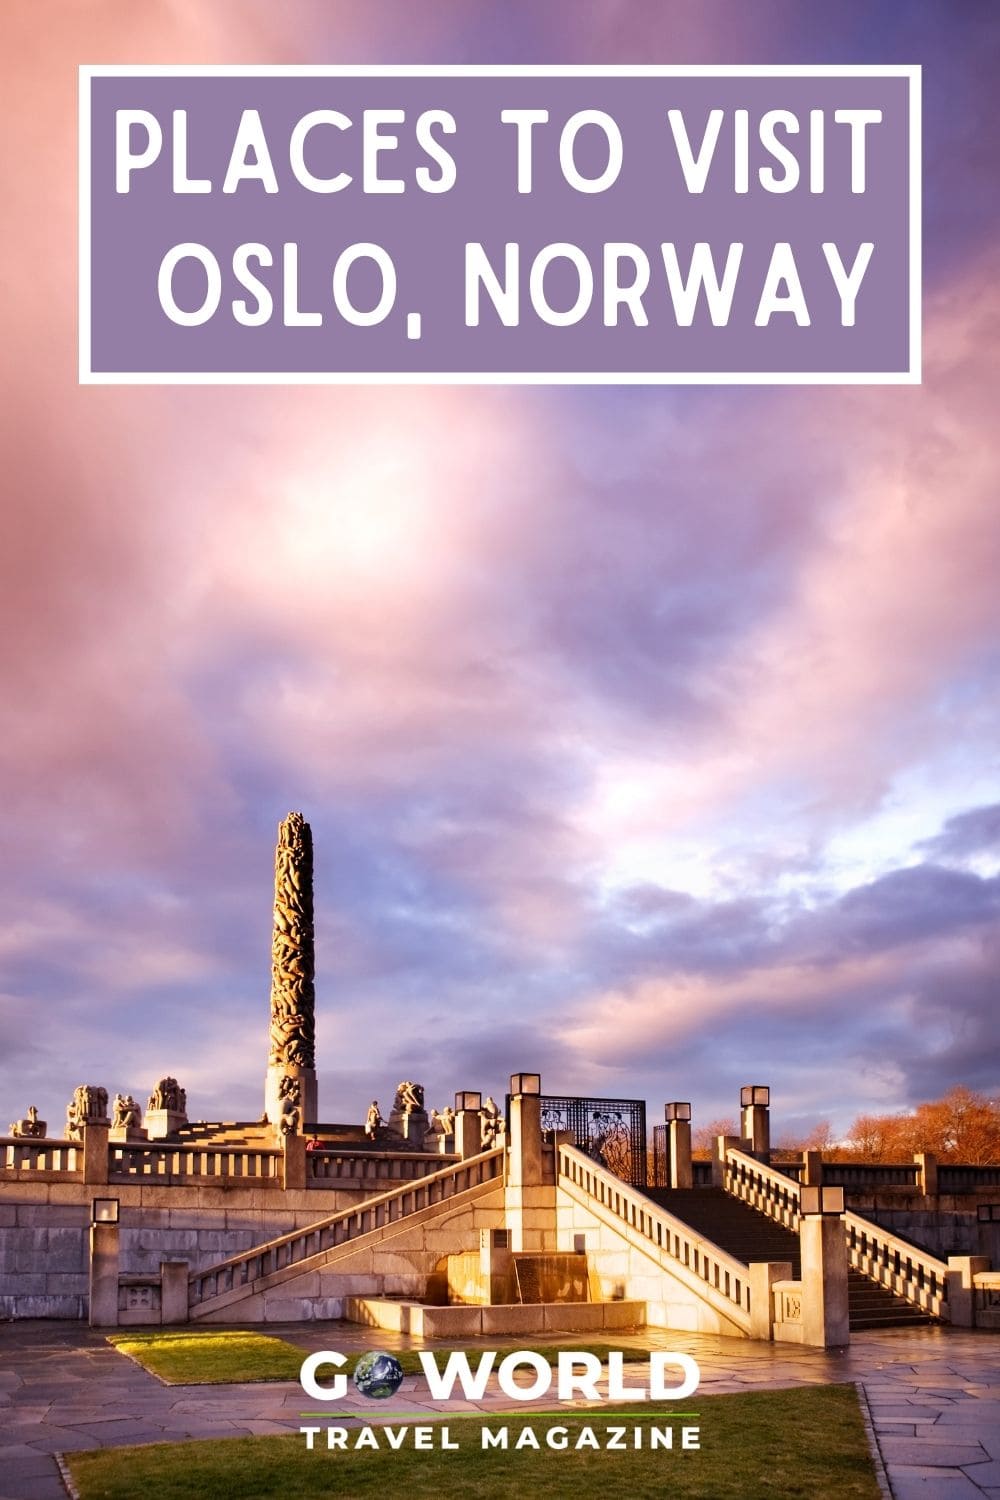 If you're planning a trip to Norway, you must check out this list of must-see places to visit in Oslo that will leave you in awe of the city. #norway #oslonorway